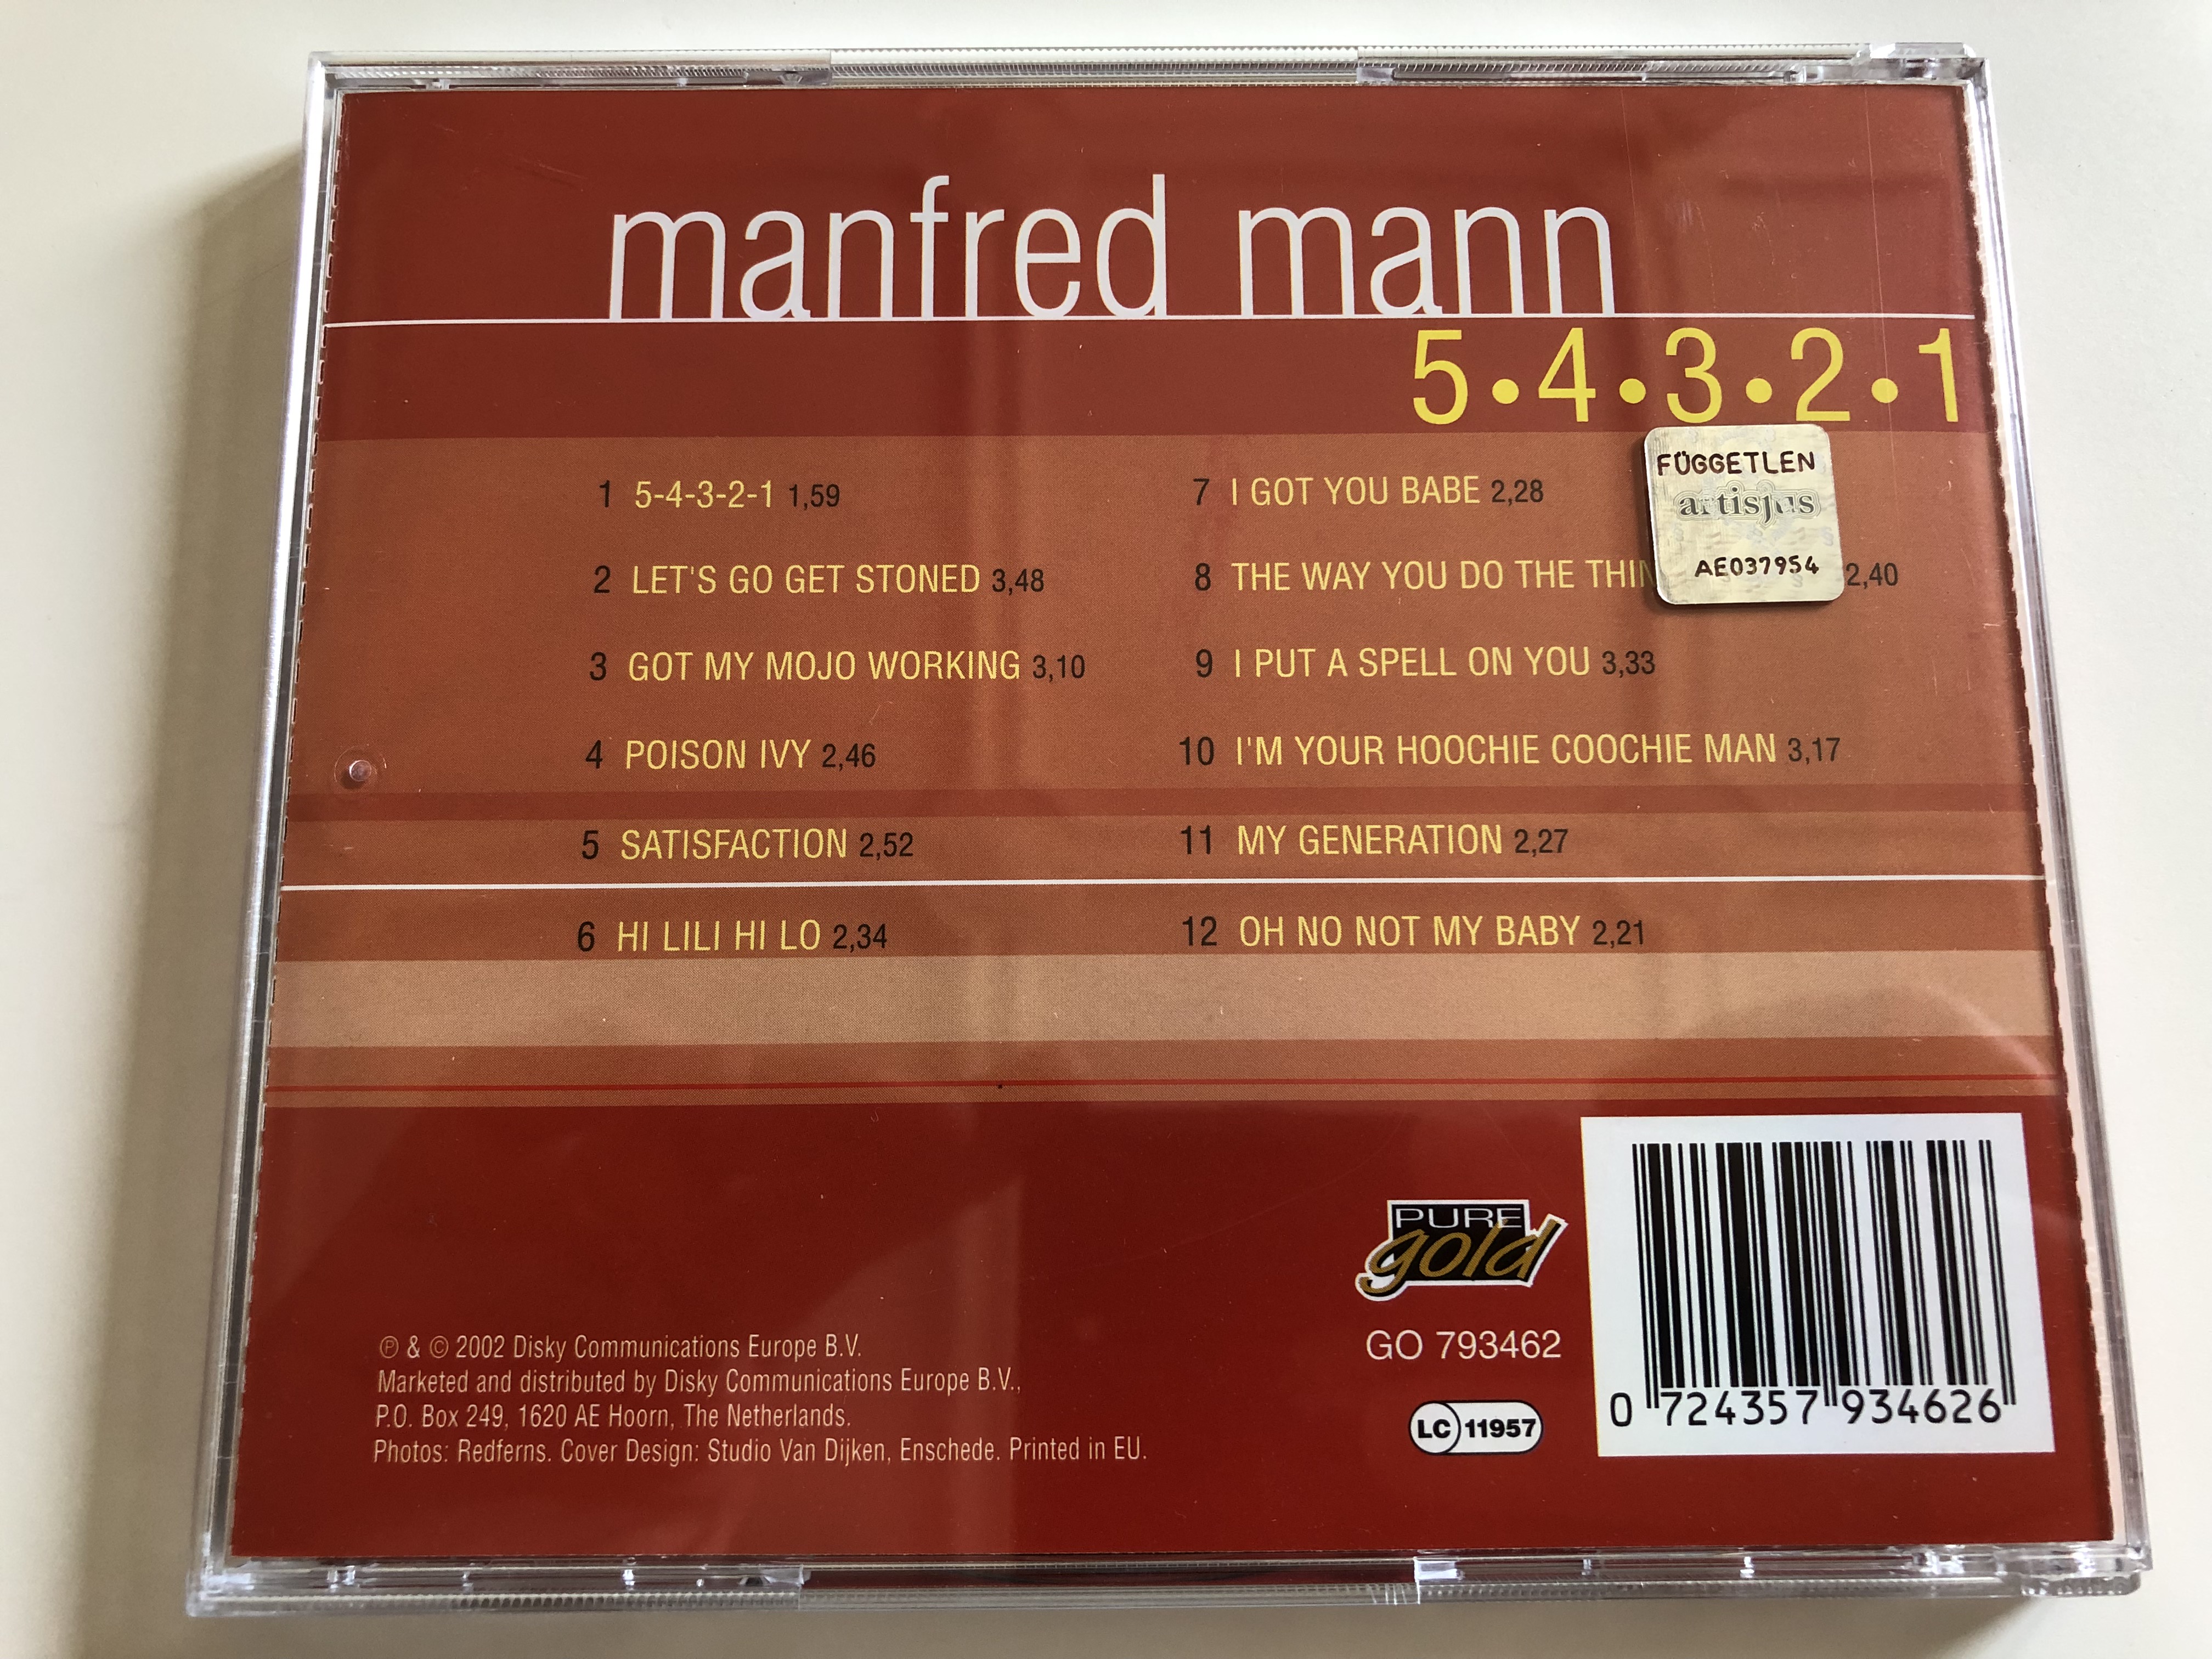 manfred-mann-5-4-3-2-1-let-s-go-get-stoned-i-put-a-spell-on-you-i-got-you-babe-pure-gold-audio-cd-2002-go-793462-4-.jpg